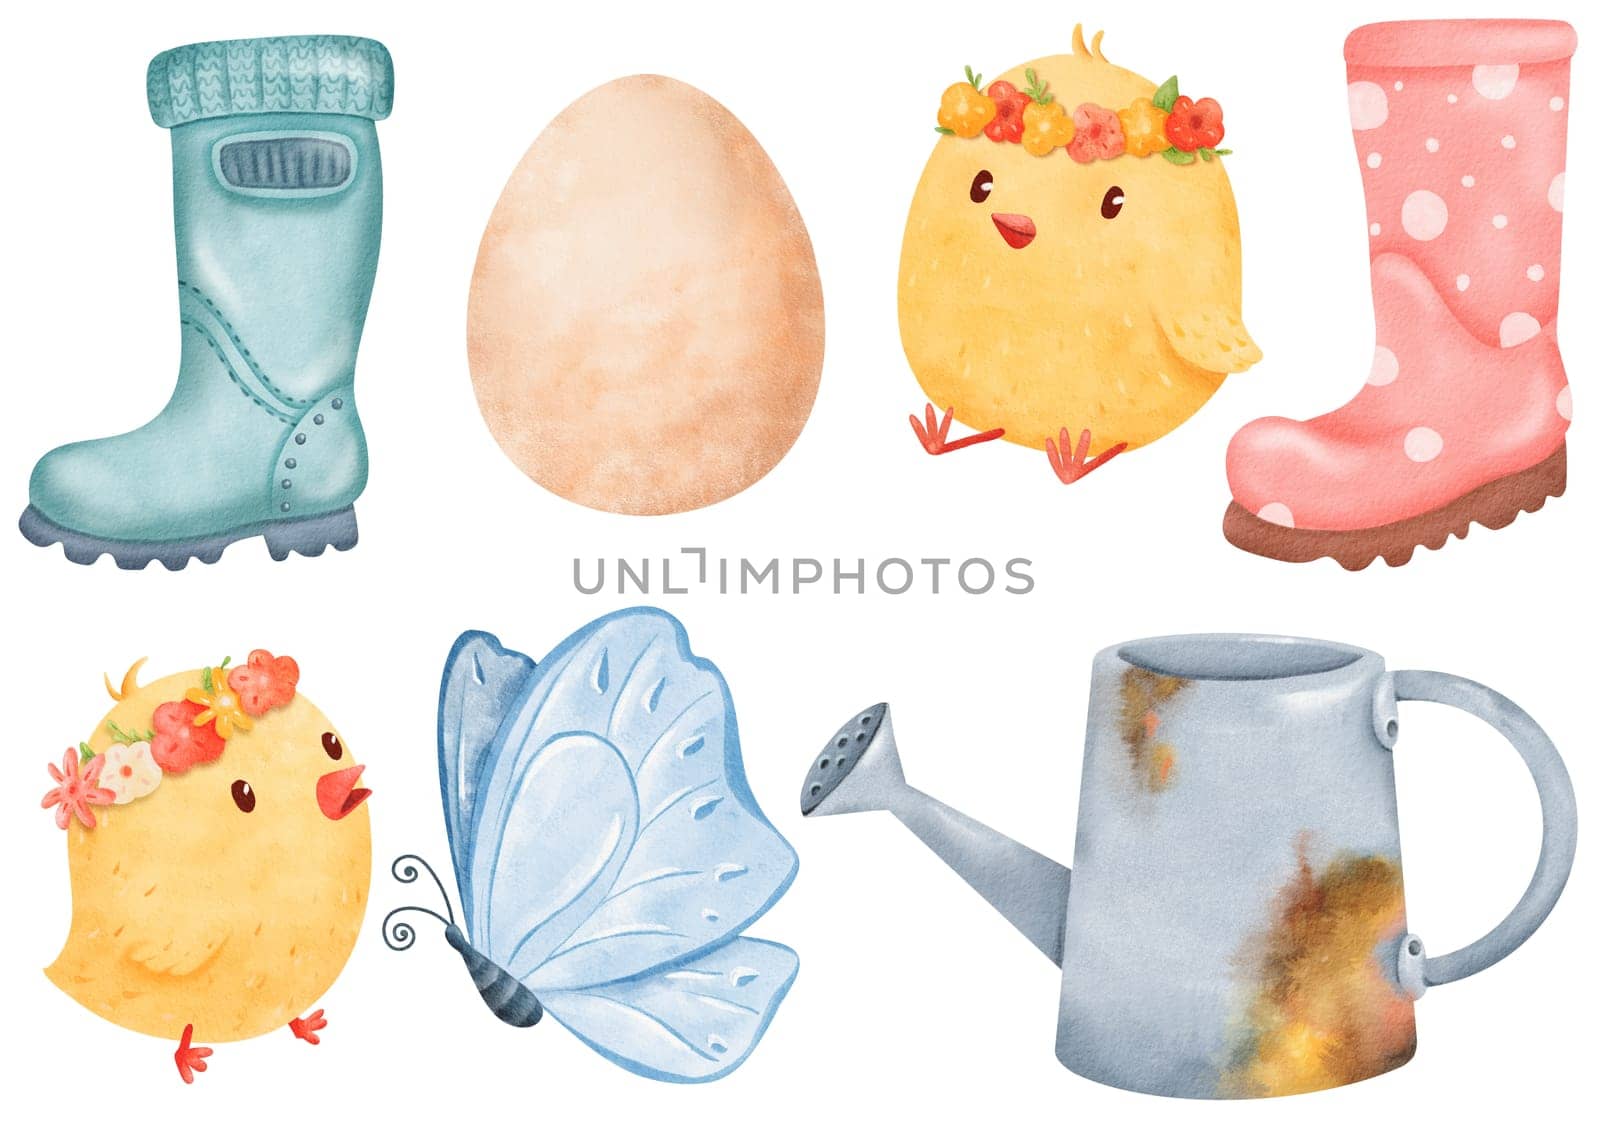 watercolor set. rubber boots, chicks adorned with floral wreaths, a blue butterfly, a hen's egg, and a rusty watering can. farm-themed designs, and creative projects in need of a rustic flair.